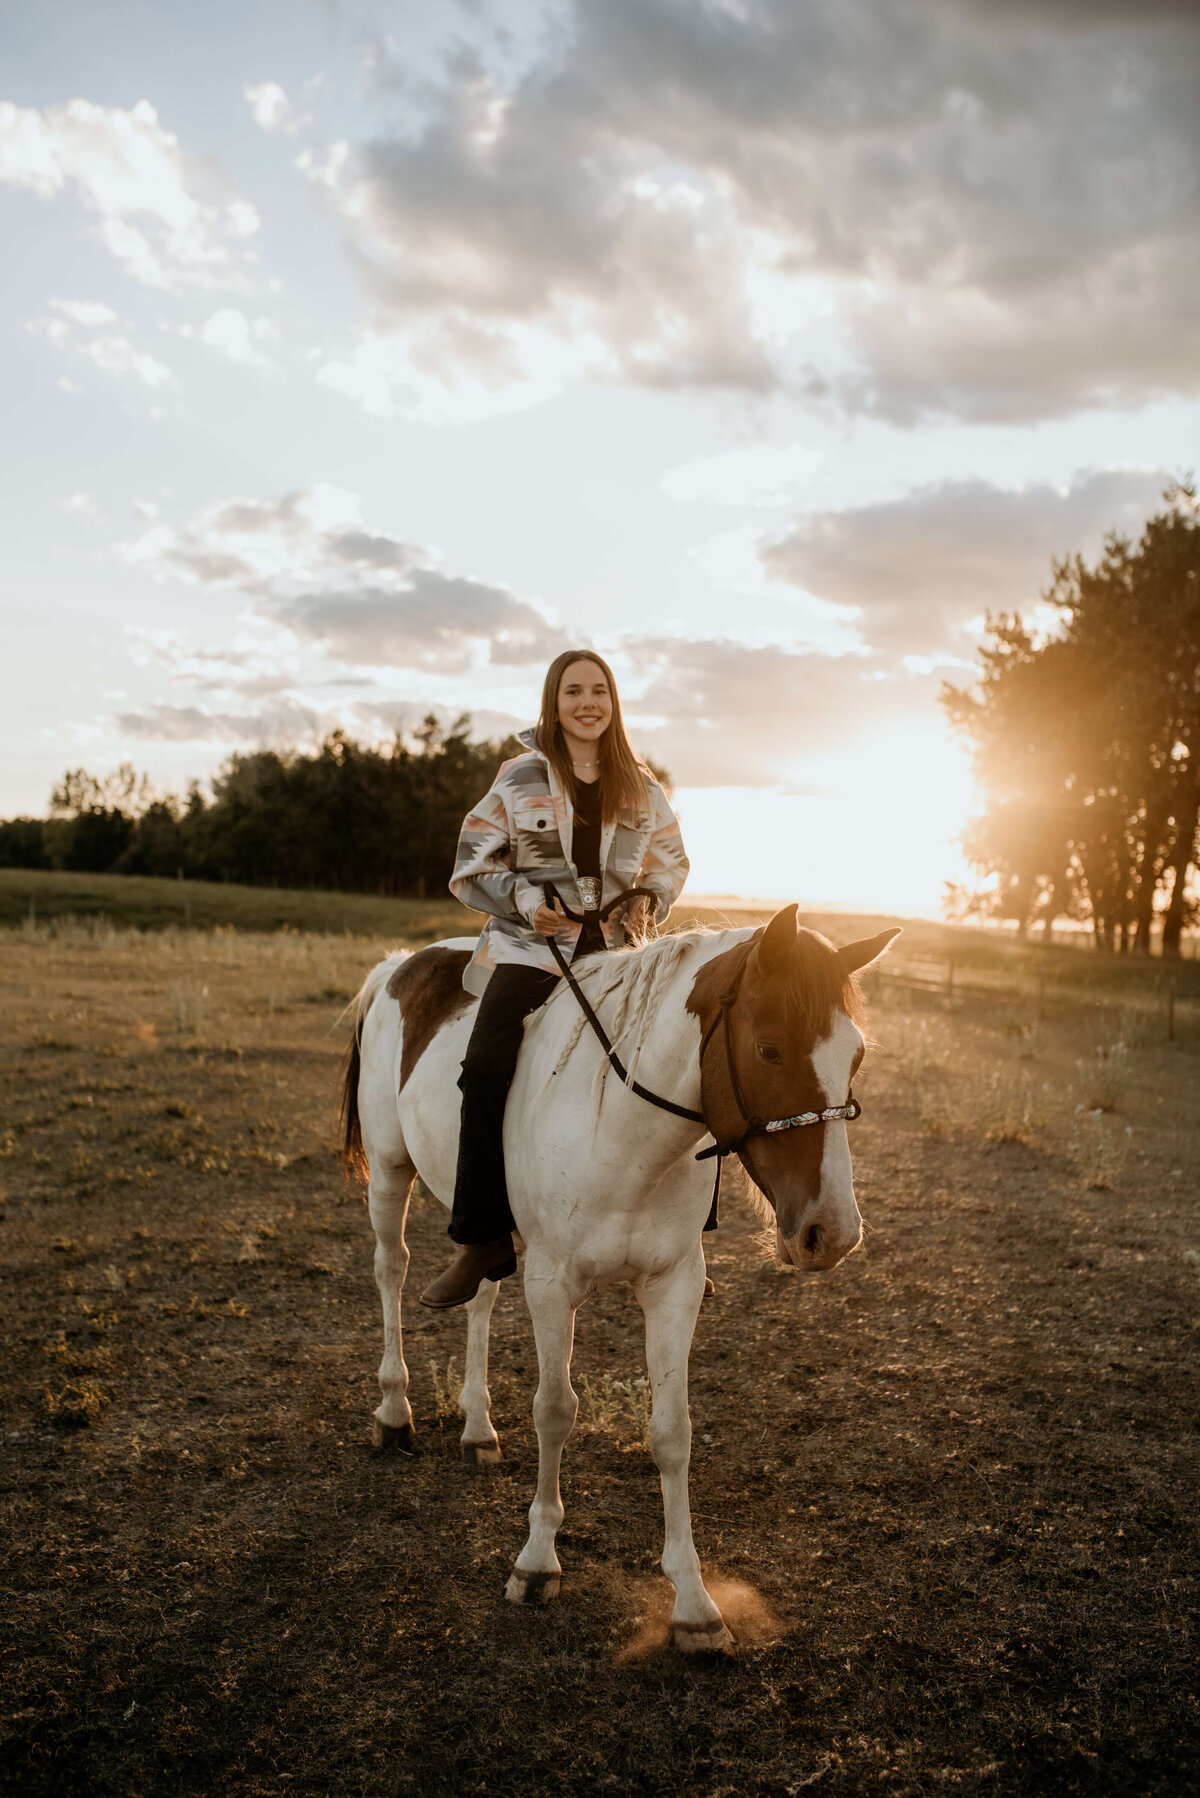 Girl rides white and brown horse